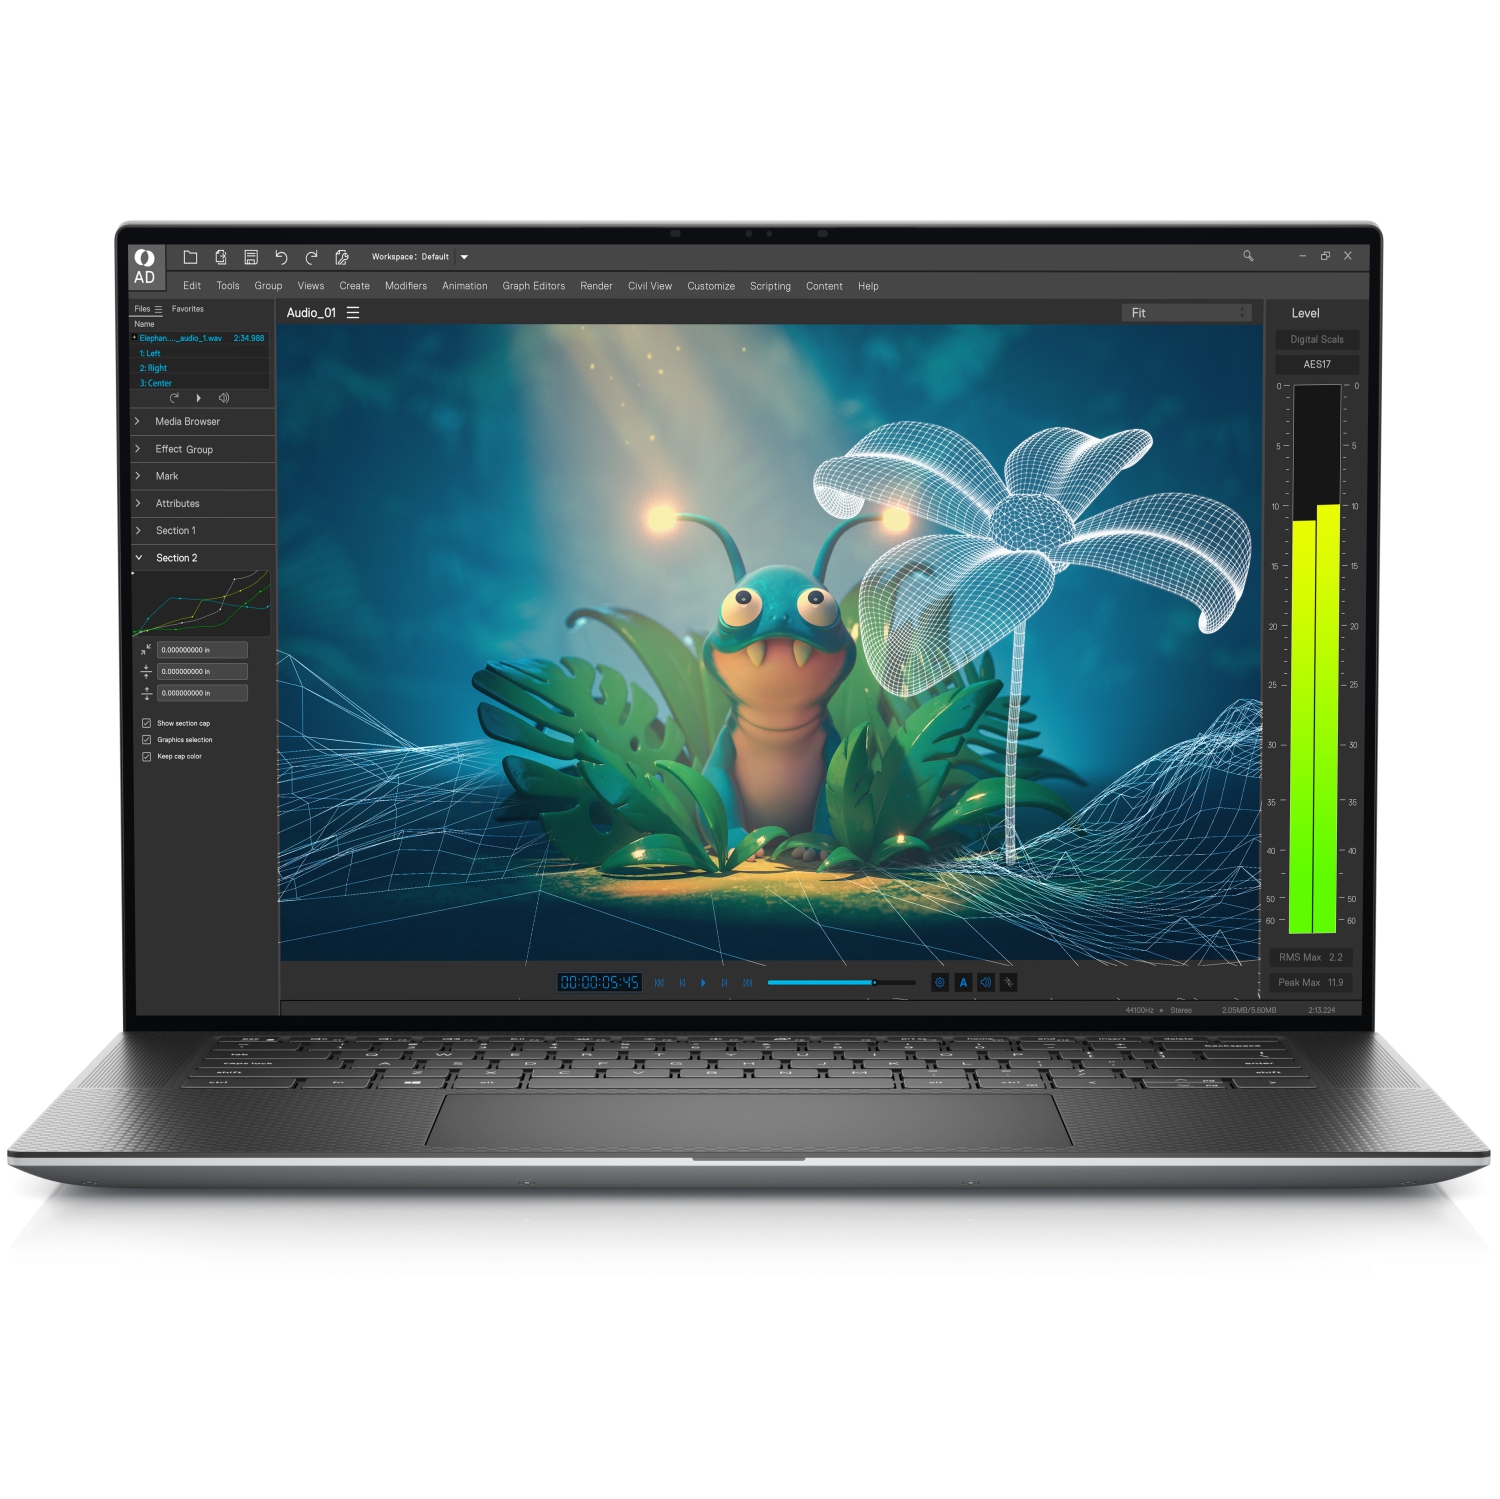 Dell Precision 5000 5570 Workstation Laptop (2022) | 15.6" 4K Touch | Core i7 - 1TB SSD + 512GB SSD - 32GB RAM - RTX A1000 | 14 Cores @ 4.8 GHz - 12th Gen CPU Certified Refurbished